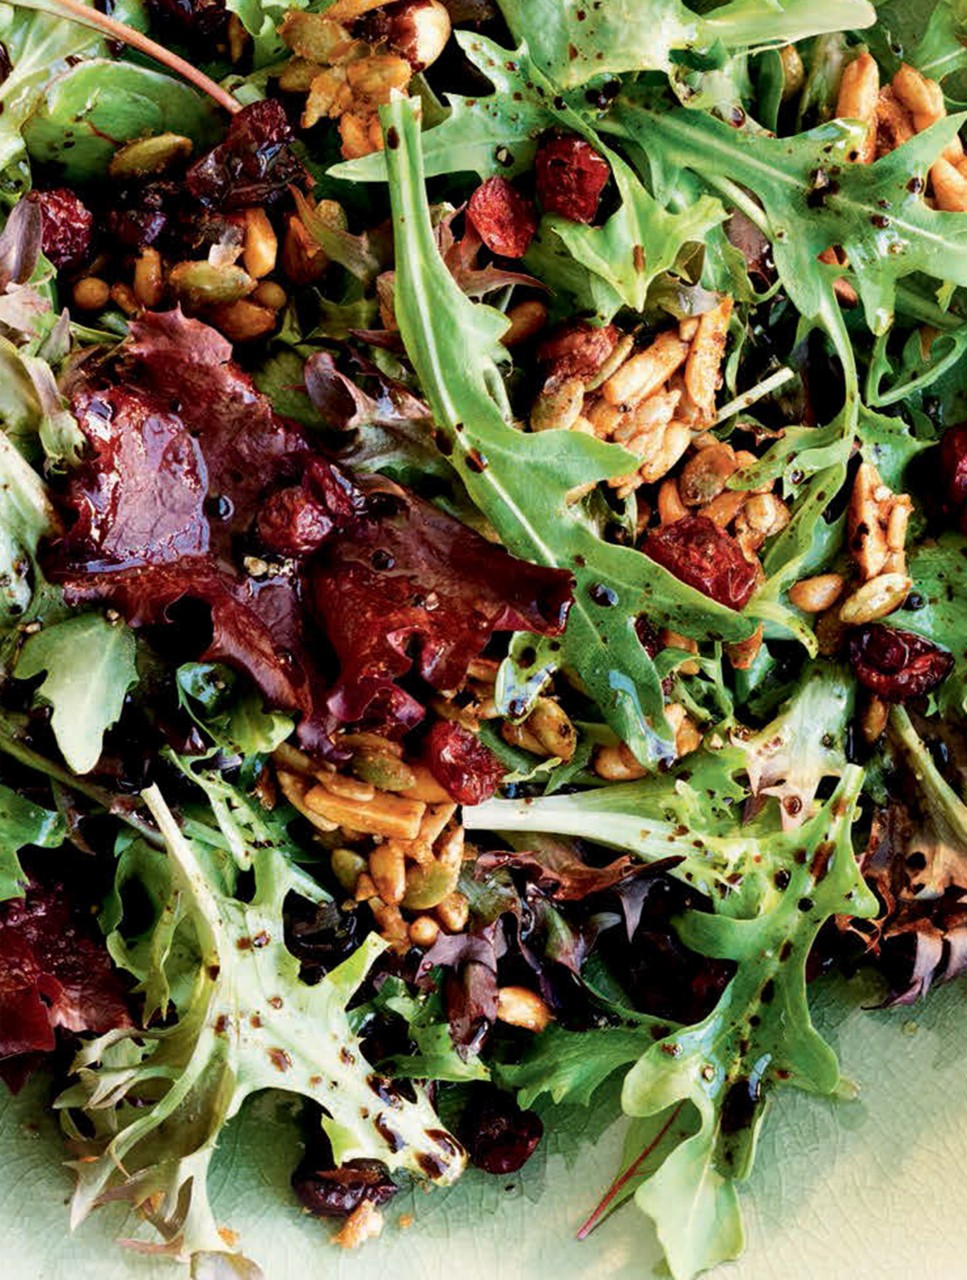 Tossed Salad with Harvest Nuts & Cranberries